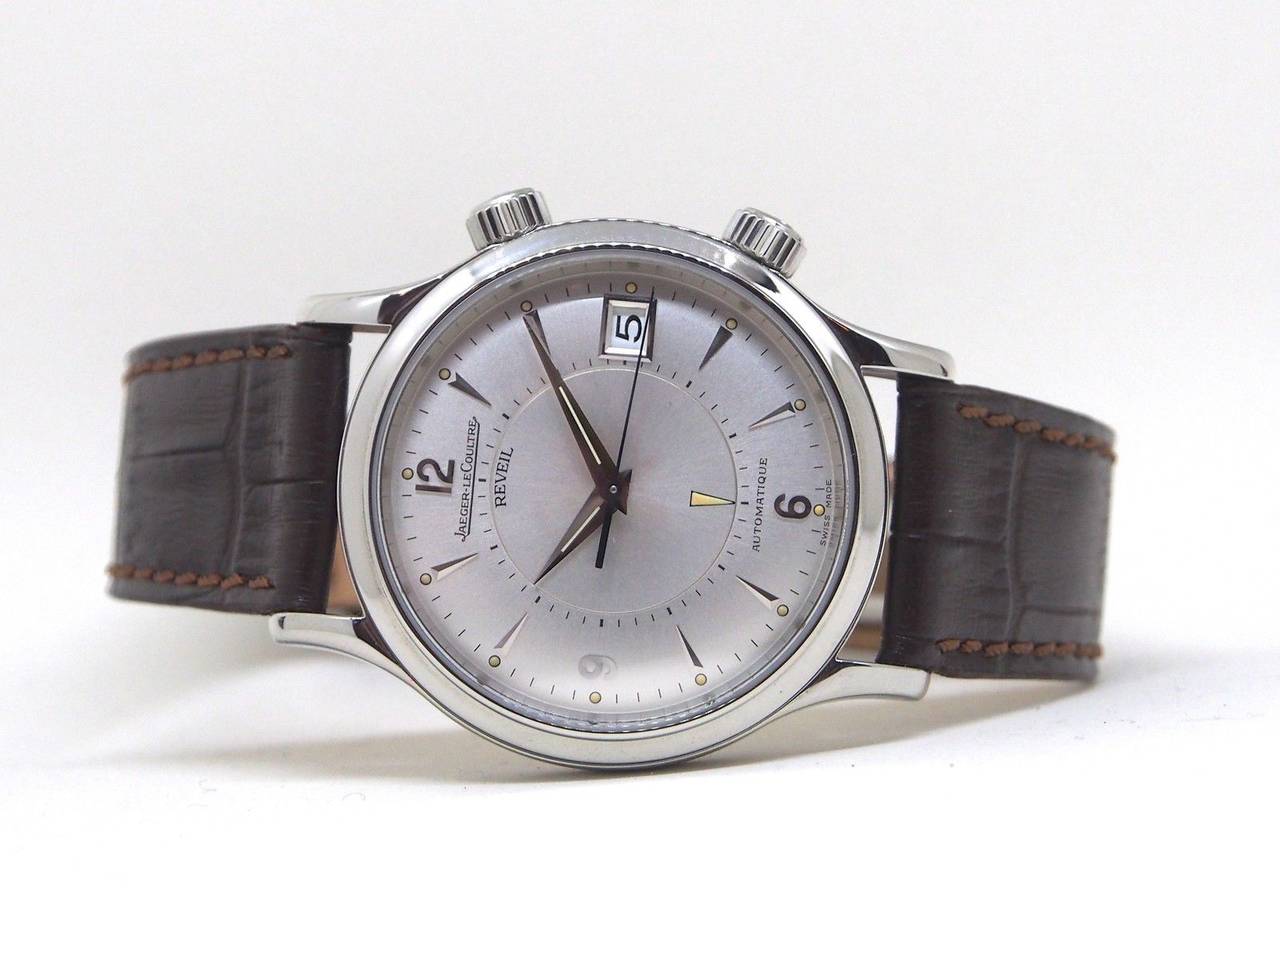 Brand Name	Jaeger LeCoultre
Style Number	141.8.97
Also Called	Q141897
Series	Master Control Reveil Alarm
Gender	Gent's 
Case Material	Stainless Steel
Dial Color	Silver
Movement	Automatic
Engine	JLC caliber 918 | 28.800 A/h 
Functions	Hours,